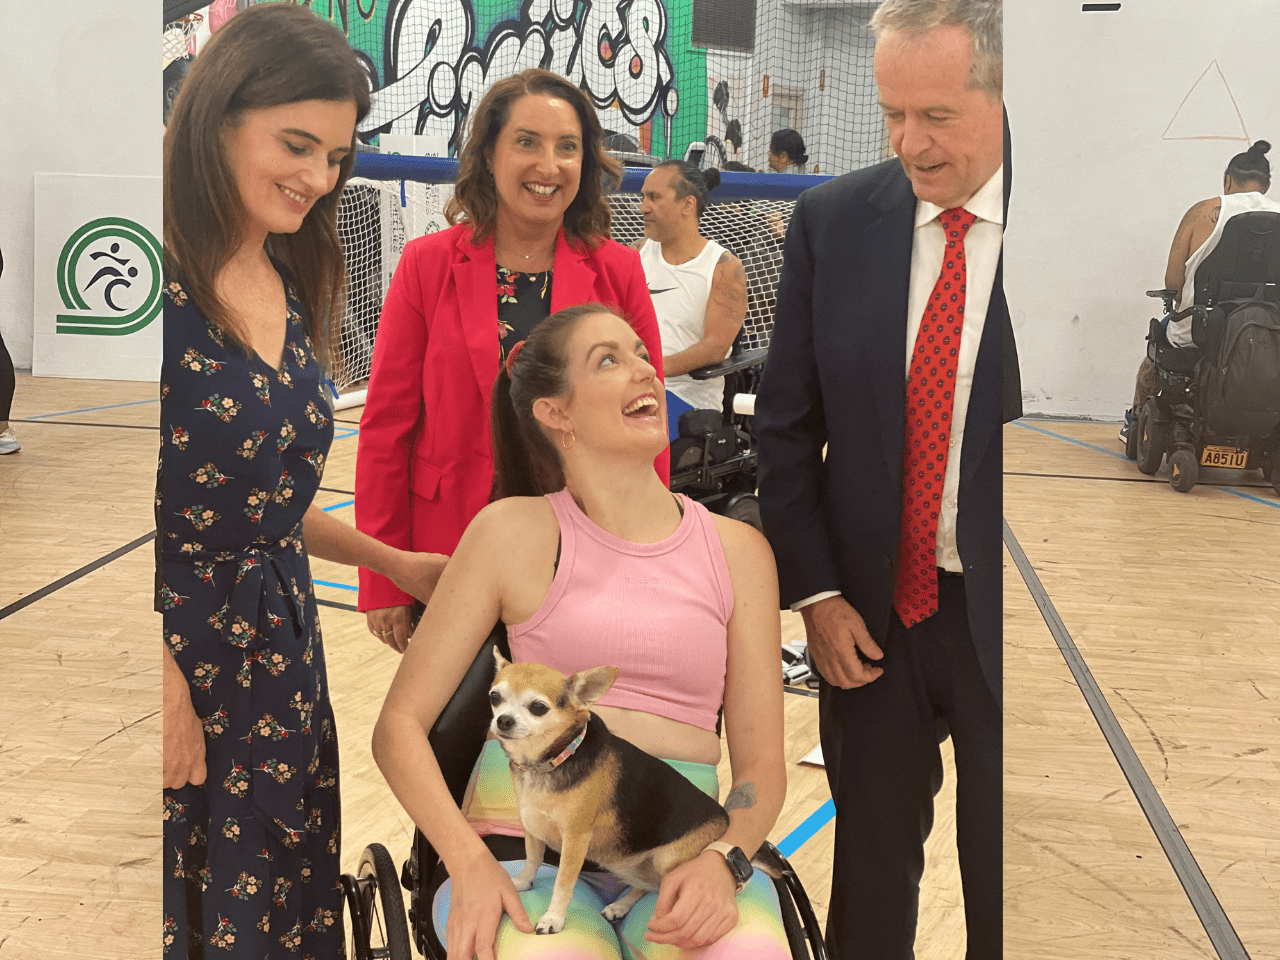 Bill Shorten visiting Sporting Wheelies with our member Sam and Amanda Mather and Ali France